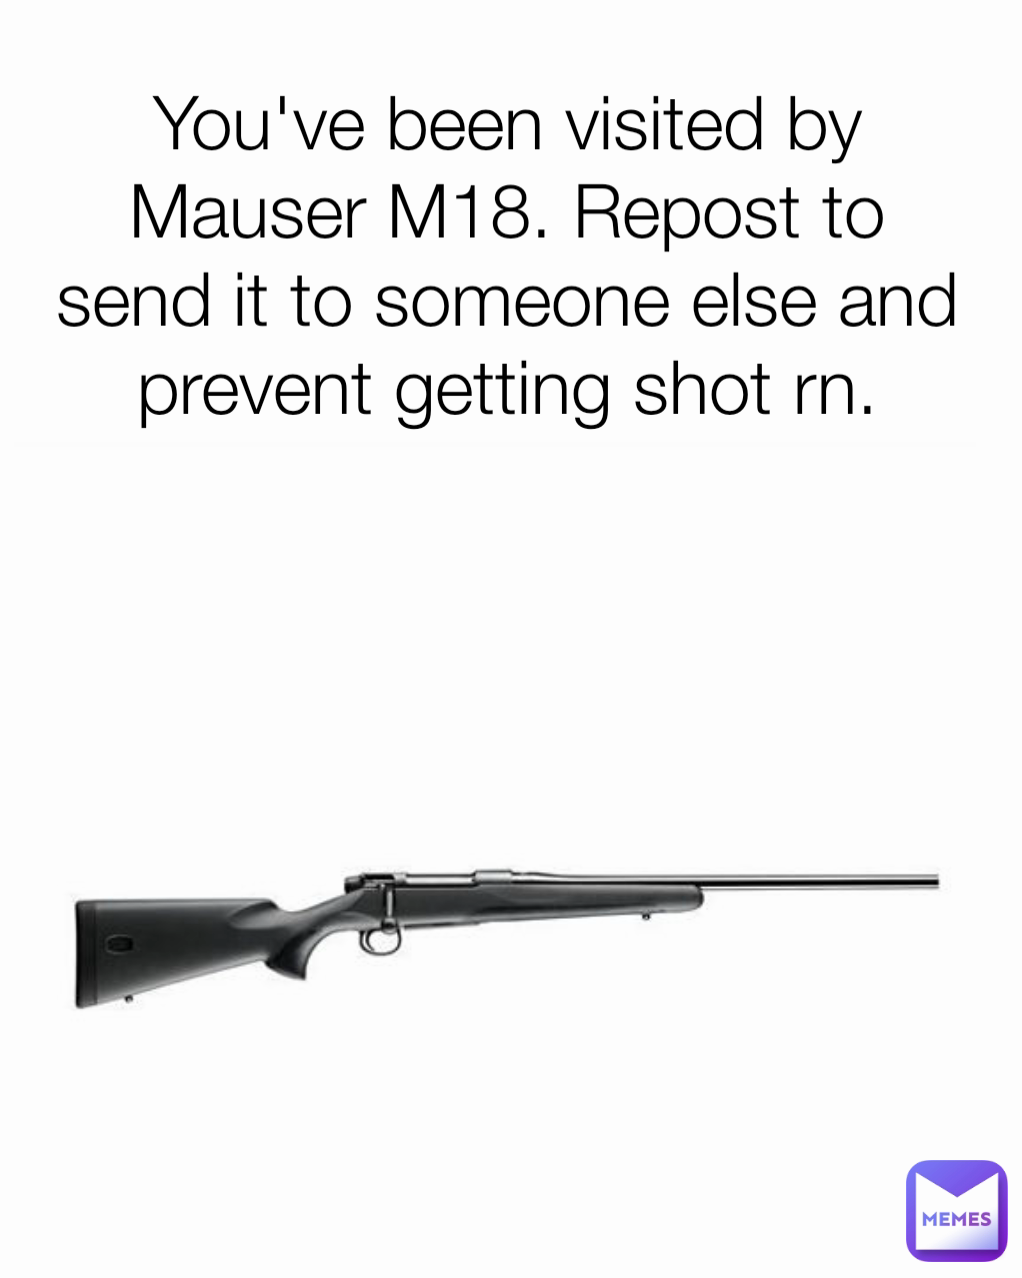 You've been visited by Mauser M18. Repost to send it to someone else and prevent getting shot rn.